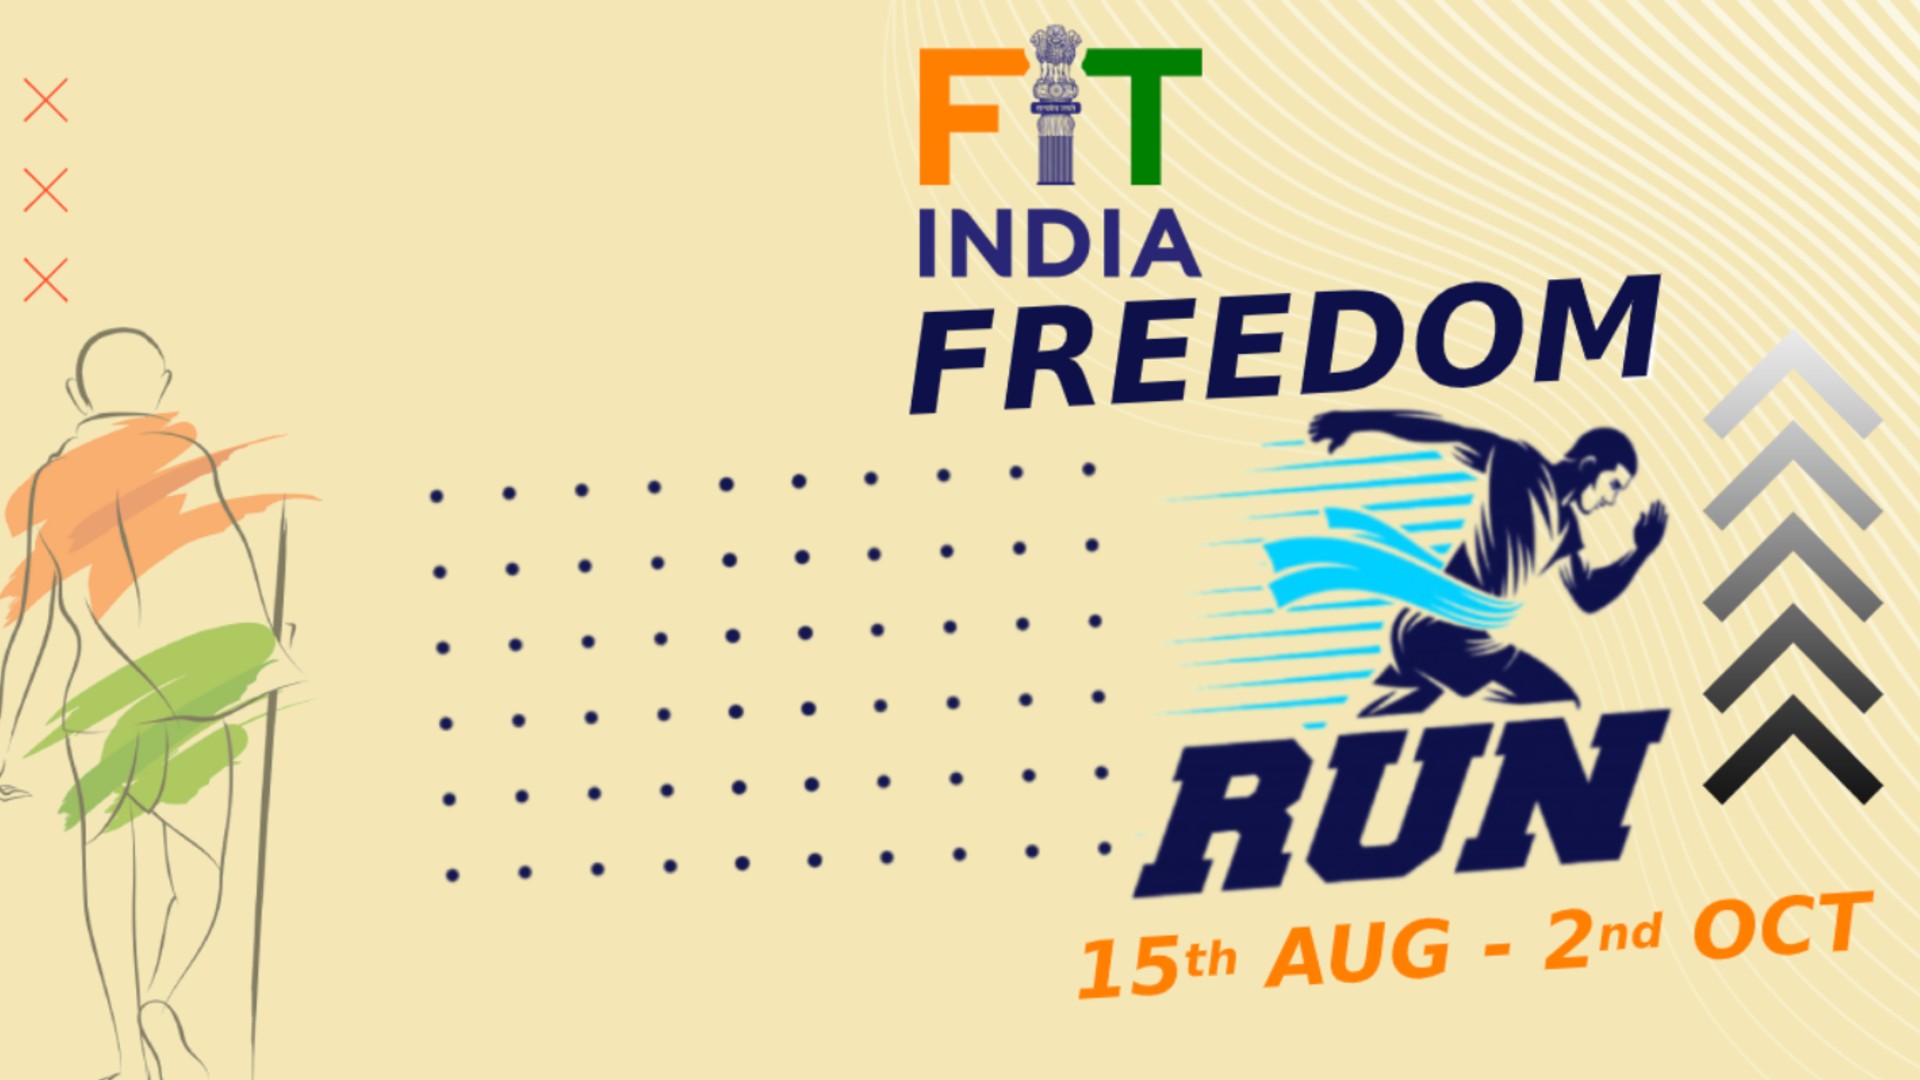 Indian Railways to fully support implementation of “Fit India Freedom Run”  starting from 15th August to 2nd October 2020